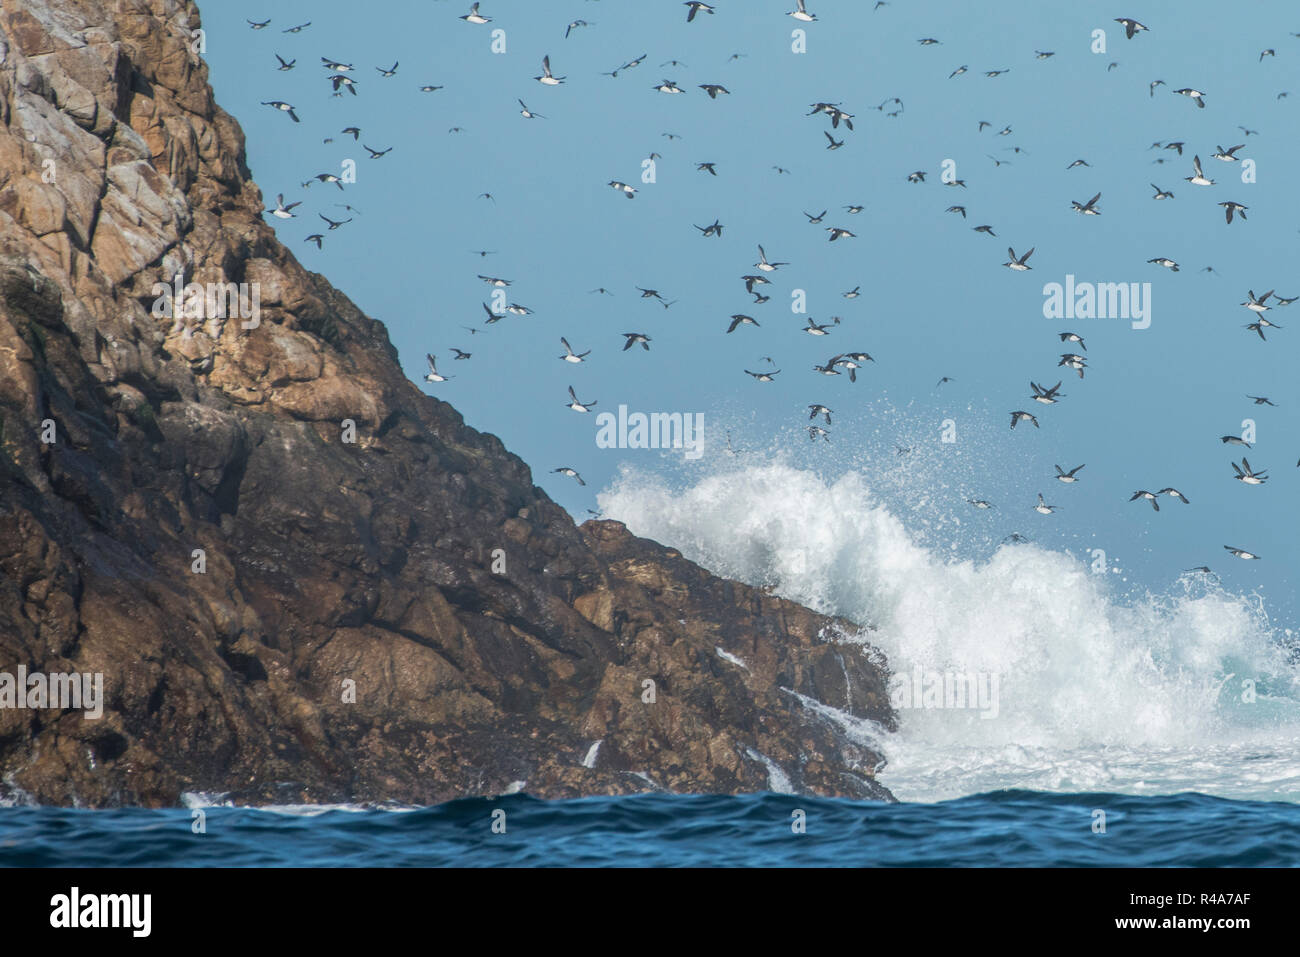 Common murres fly over the rough ocean waters at the Farallon islands off the coast of California. Stock Photo